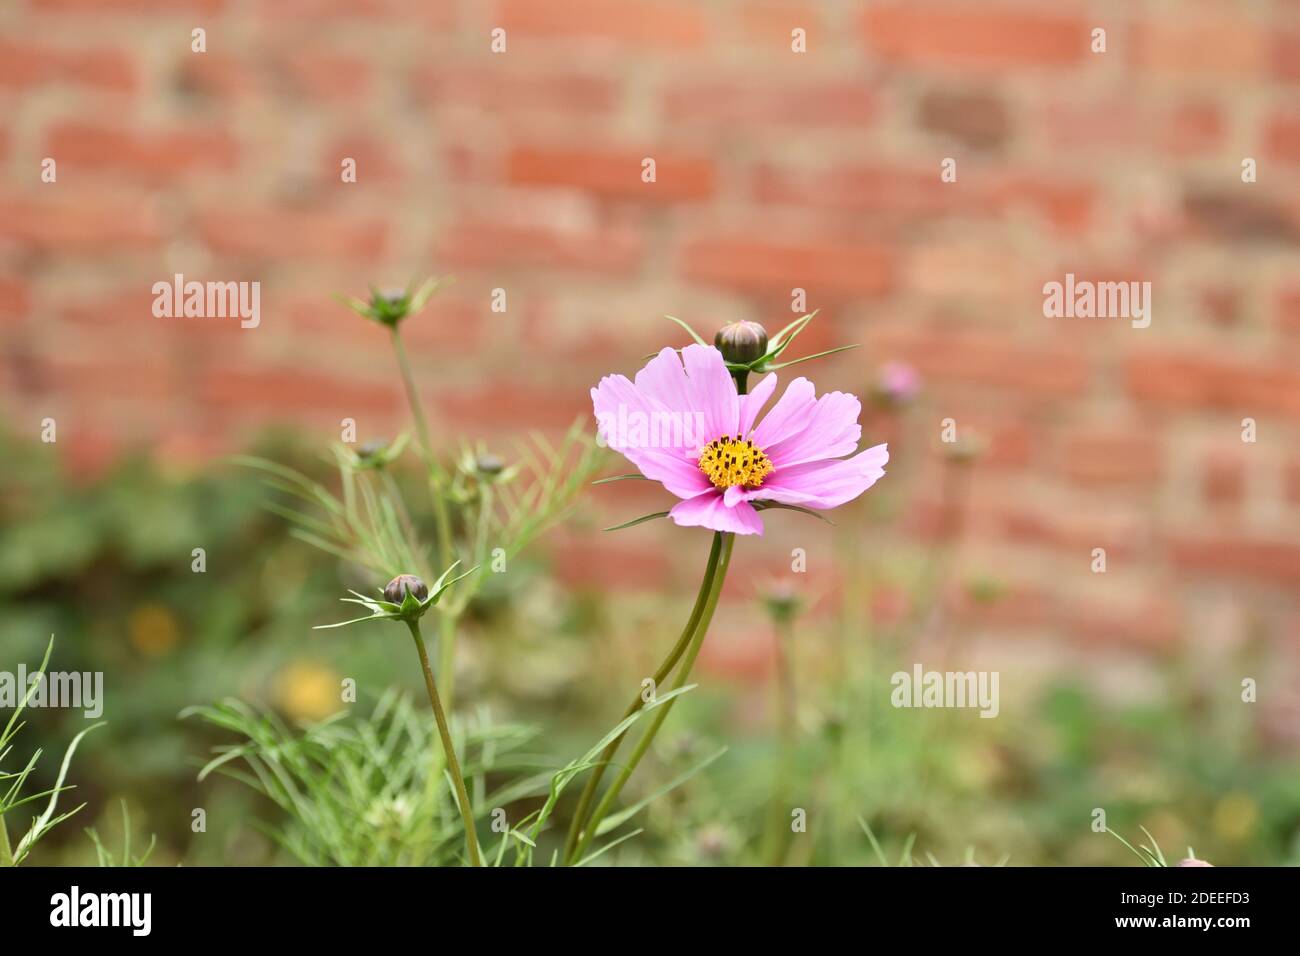 Cosmos flower in a garden with a brick wall behind Stock Photo